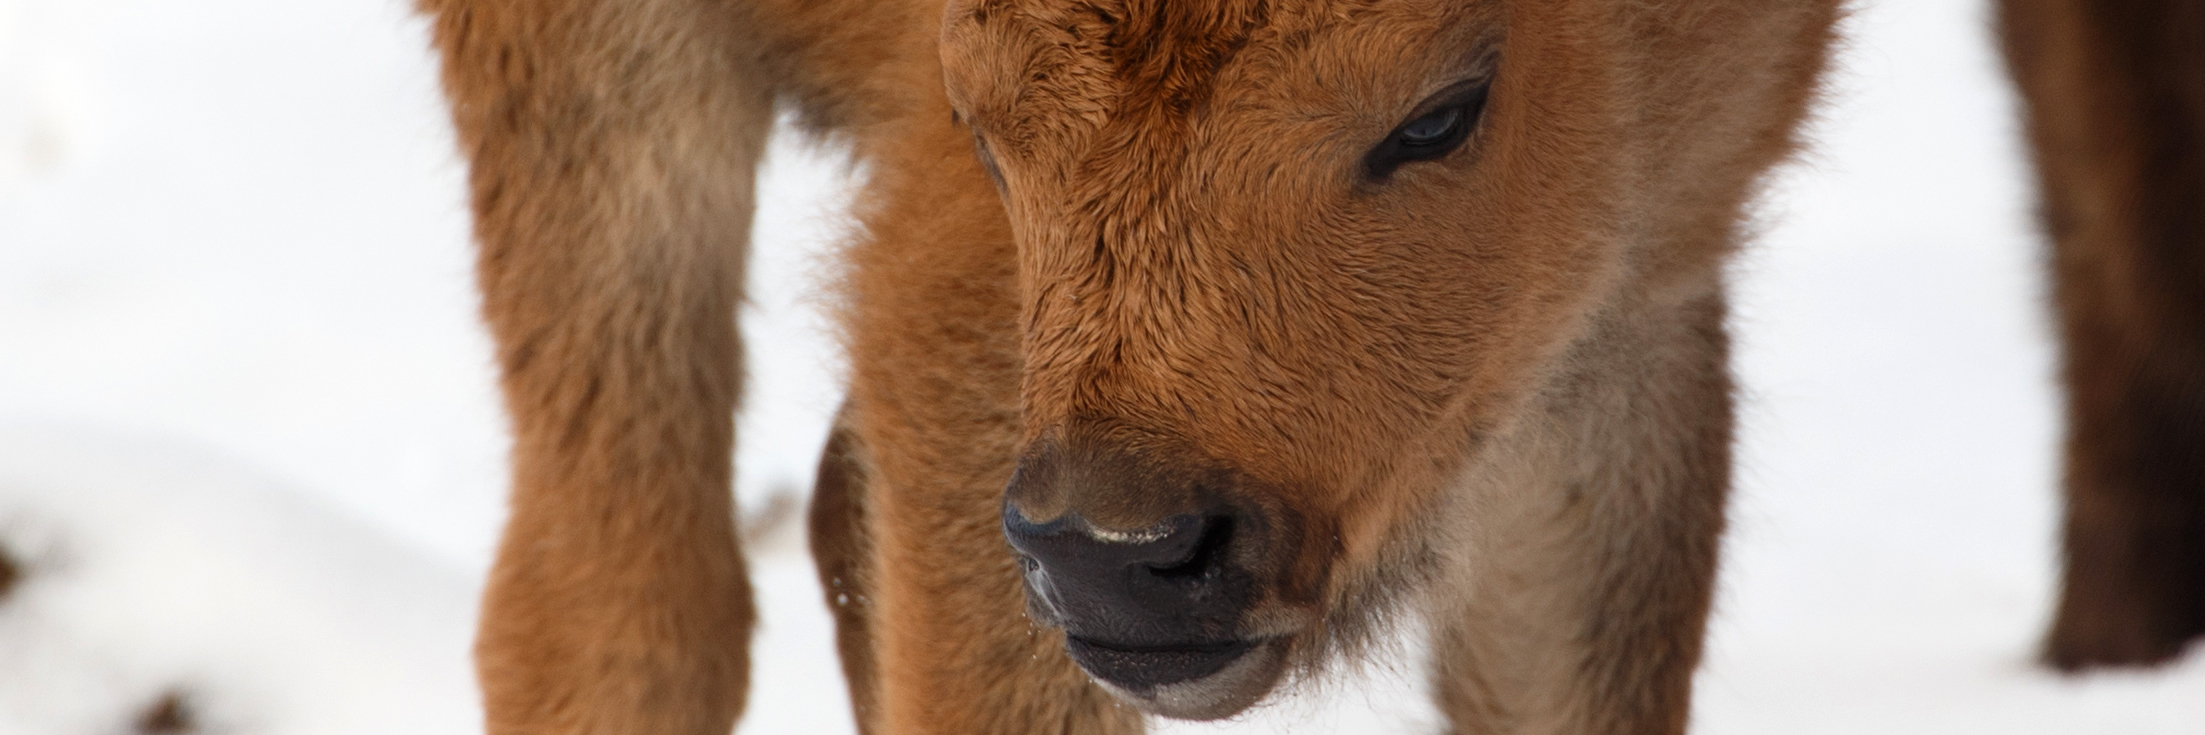 A young bison calf standing in a winter setting 